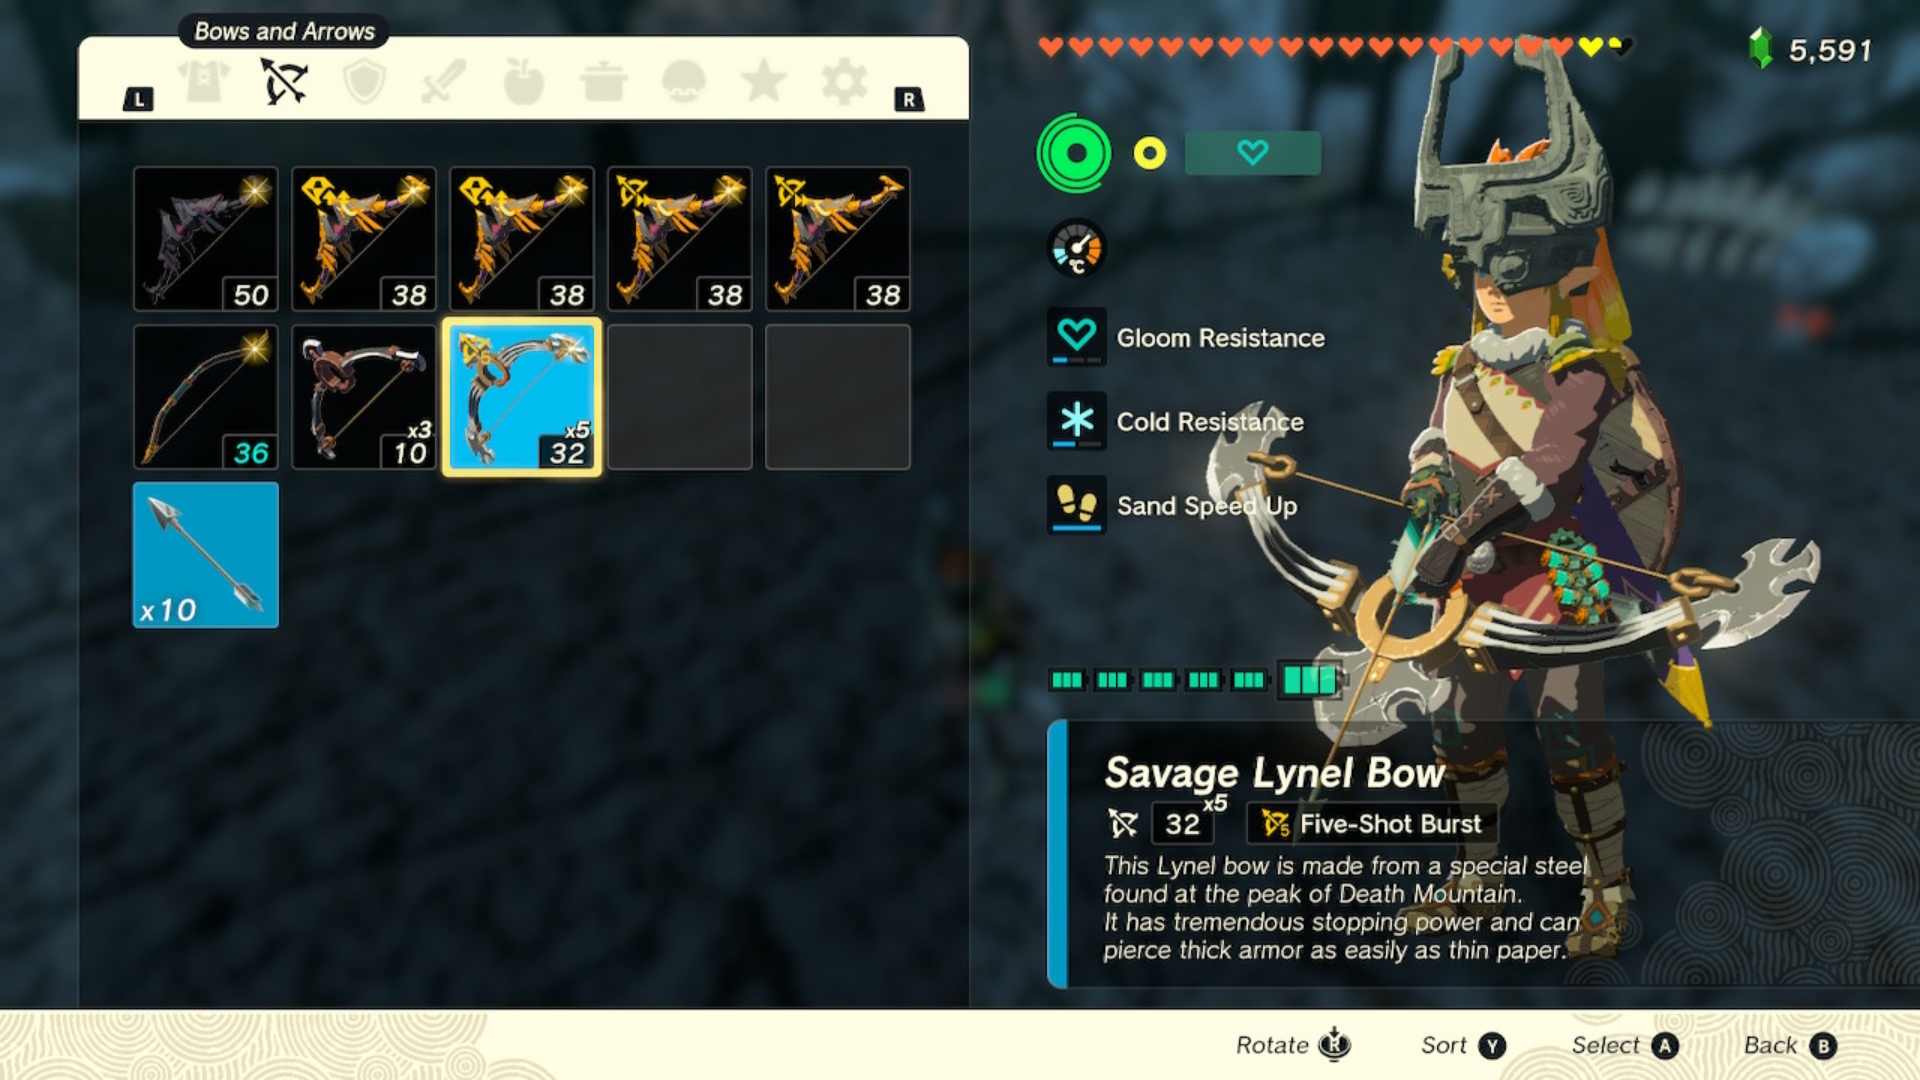 A 5 shot bow in Link's inventory.